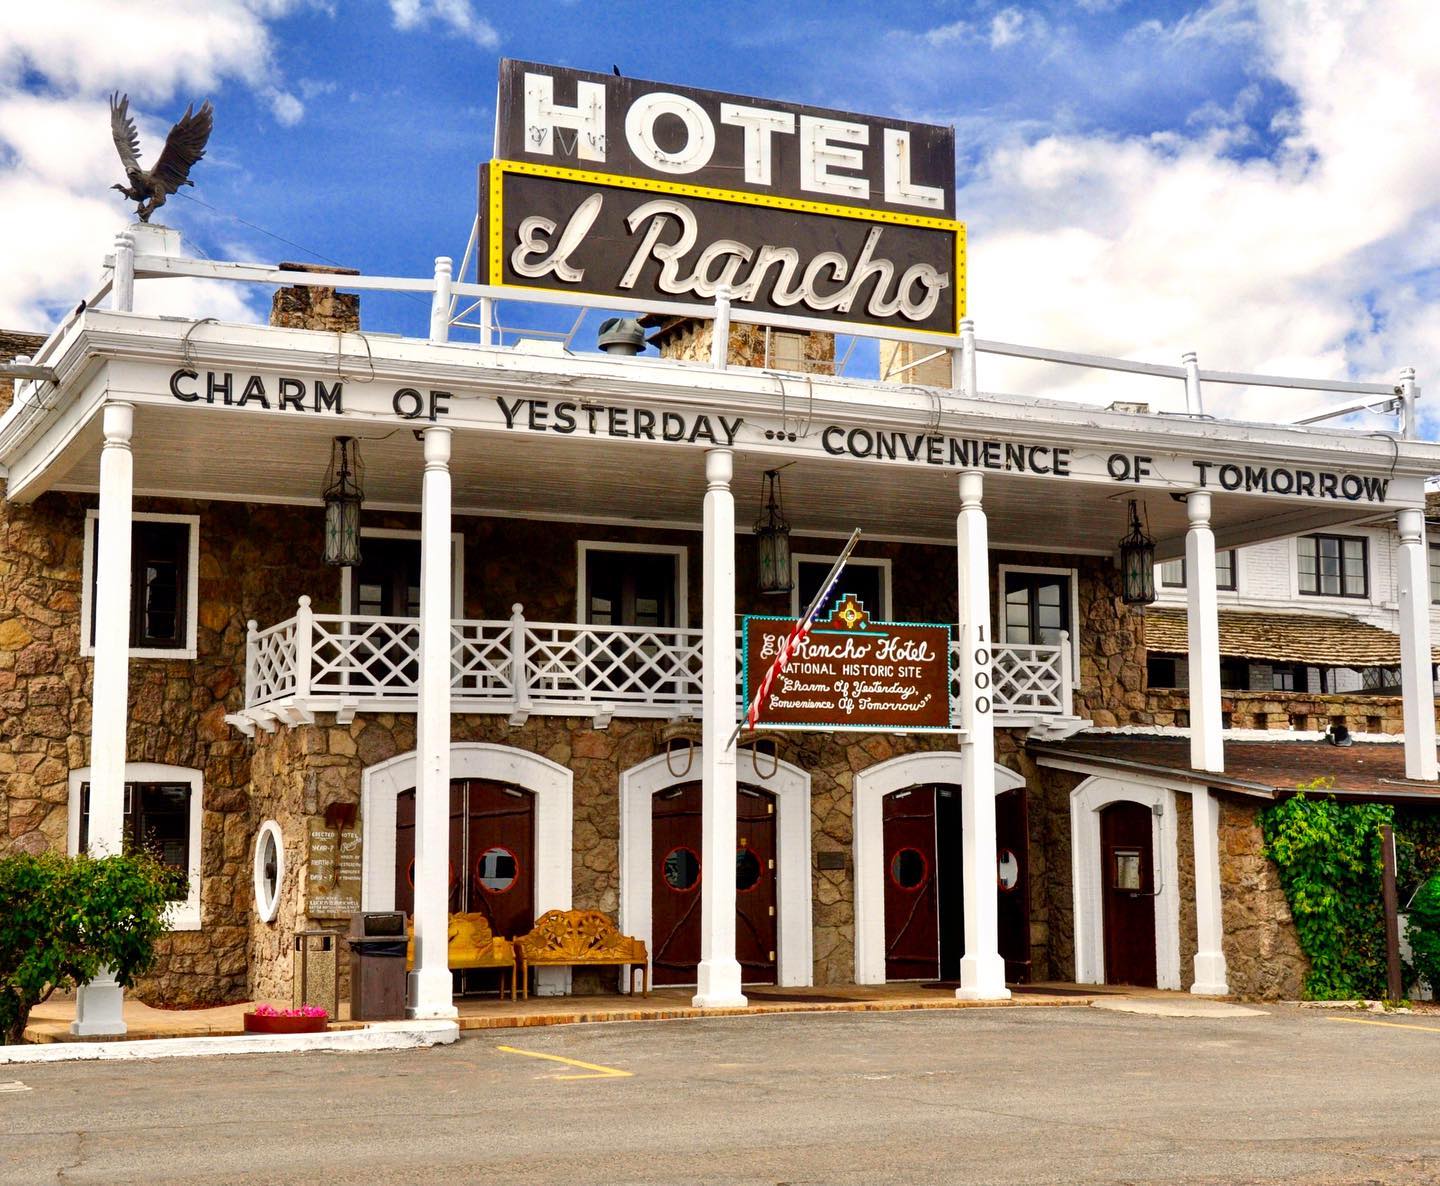 Hotel El Rancho, Gallup, New Mexico

The El Rancho Hotel and Motel is located along Route 66 innGallup and was opened in 1937. During its heyday, the El Rancho Hotel was one of the premier hotels in the entire Southwest. El Rancho was the temporary home for many Hollywood movie stars including Ronald Reagan, Spencer Tracy, Kirk Douglas, Katharine Hepburn and John Wayne while filming in the area. 

#usatravel #usatravels #usatrip #newmexico #gallup #route66 #route66roadtrip #66 #ontheroad #getyourkicksonroute66 #motherroad #historicroute66 #southwestusa #traveltheusa #travelust #roadtripusa #explorenewmexico #onlyinnewmexico #travelpics #exploretheusa #route #travel #doyoutravel #memorylane #goodolddays #instagood #ridetolive #wanderlust #goexploreusa #lovetotravel